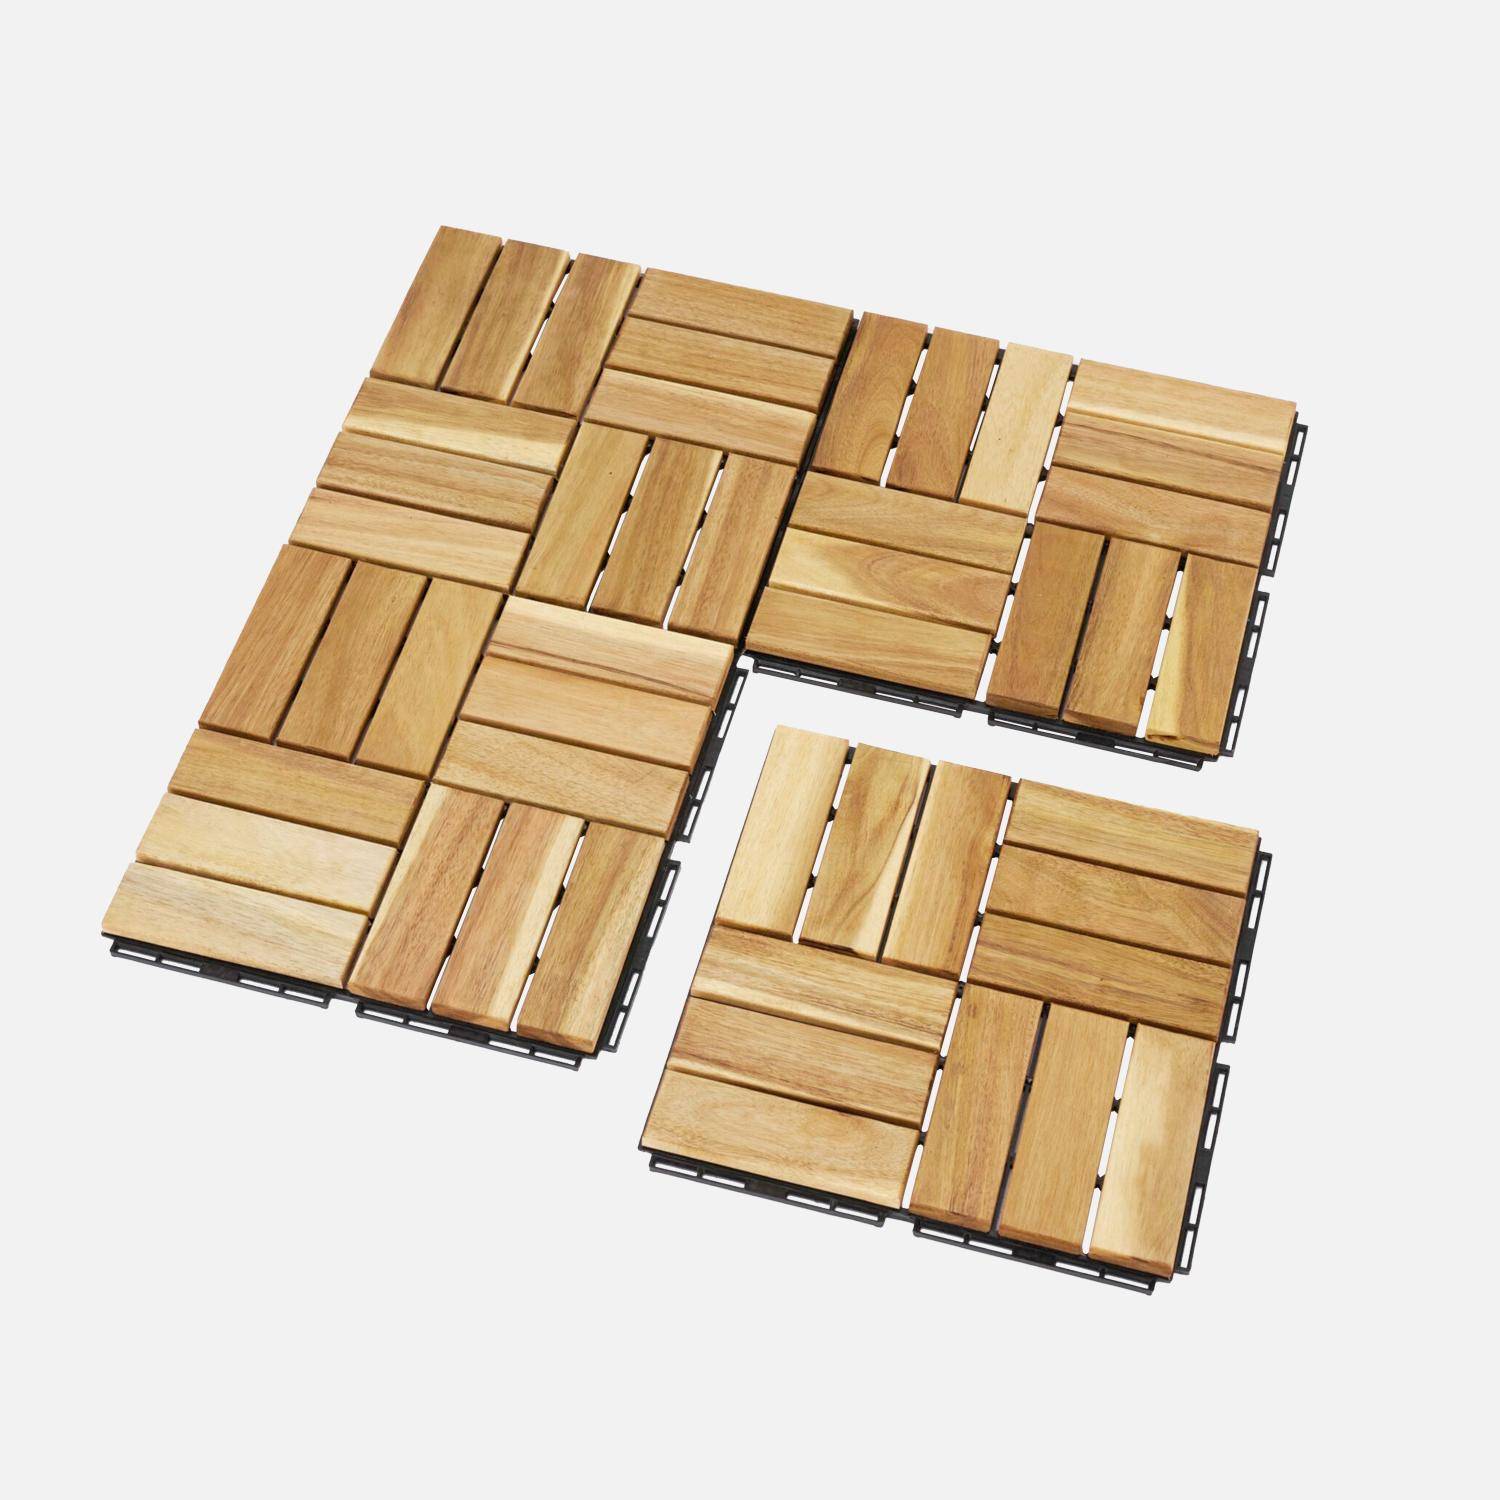 Batch of 36 acacia wood decking tiles 30x30cm, square pattern, clip-on Photo3